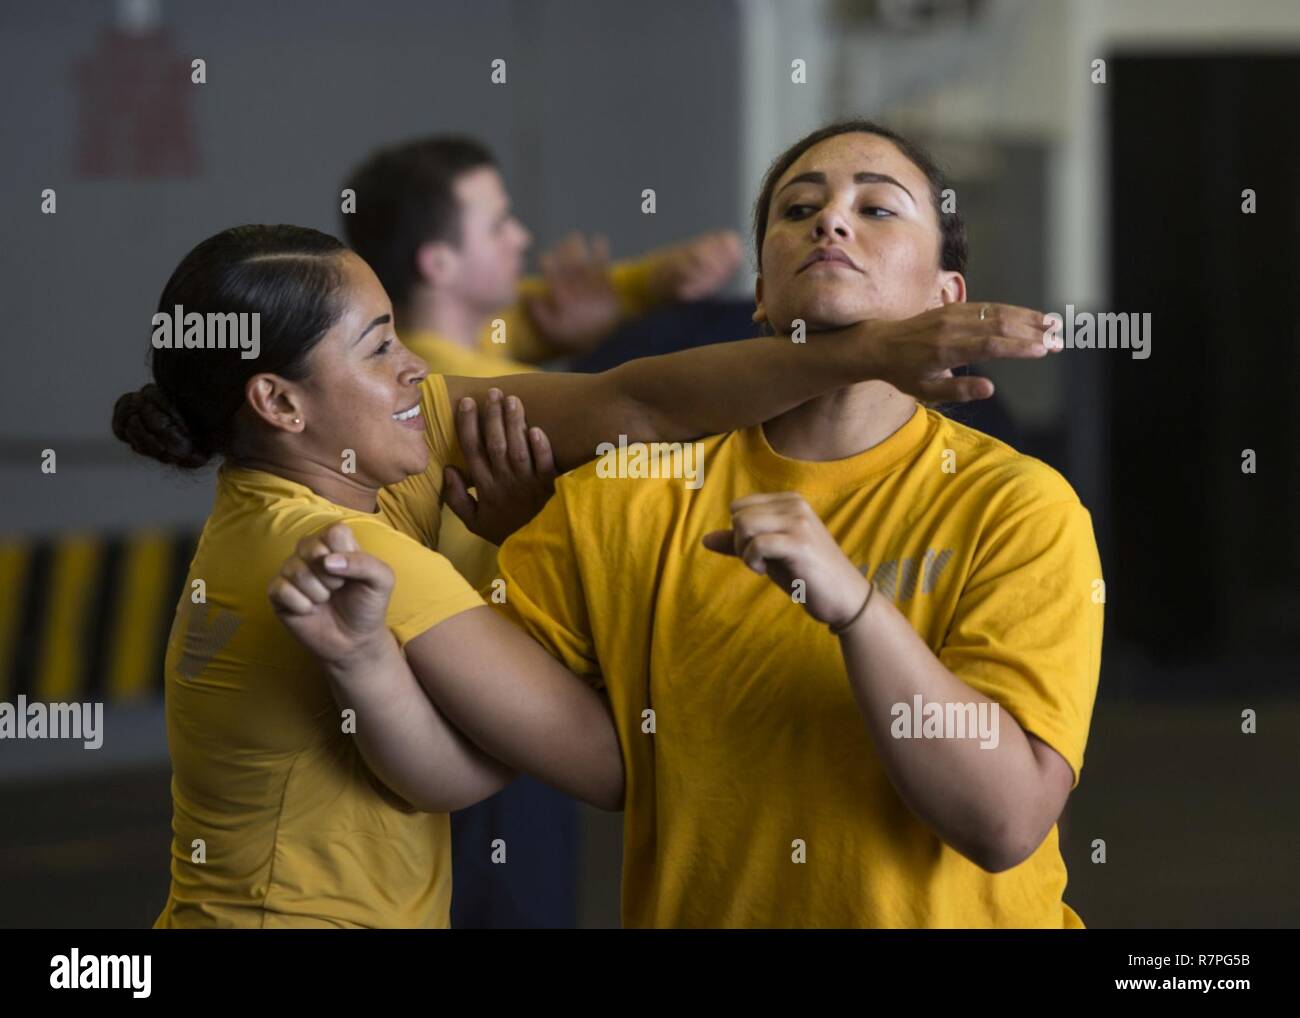 ARABIAN SEA (March 22, 2017) Aviation Machinist’s Mate 2nd Class Amelia Grubbs, from Belize, Calif., left, and Aviation Boatswain’s Mate (Handling) Airman Jennifer Lebron, from Guayama, Puerto Rico, practice takedowns during naval security force sentry training in the hangar bay of the amphibious assault ship USS Makin Island (LHD 8). Makin Island is deployed in the U.S. 5th Fleet area of operations in support of maritime security operations designed to reassure allies and partners, and preserve the freedom of navigation and the free flow of commerce in the region. Stock Photo